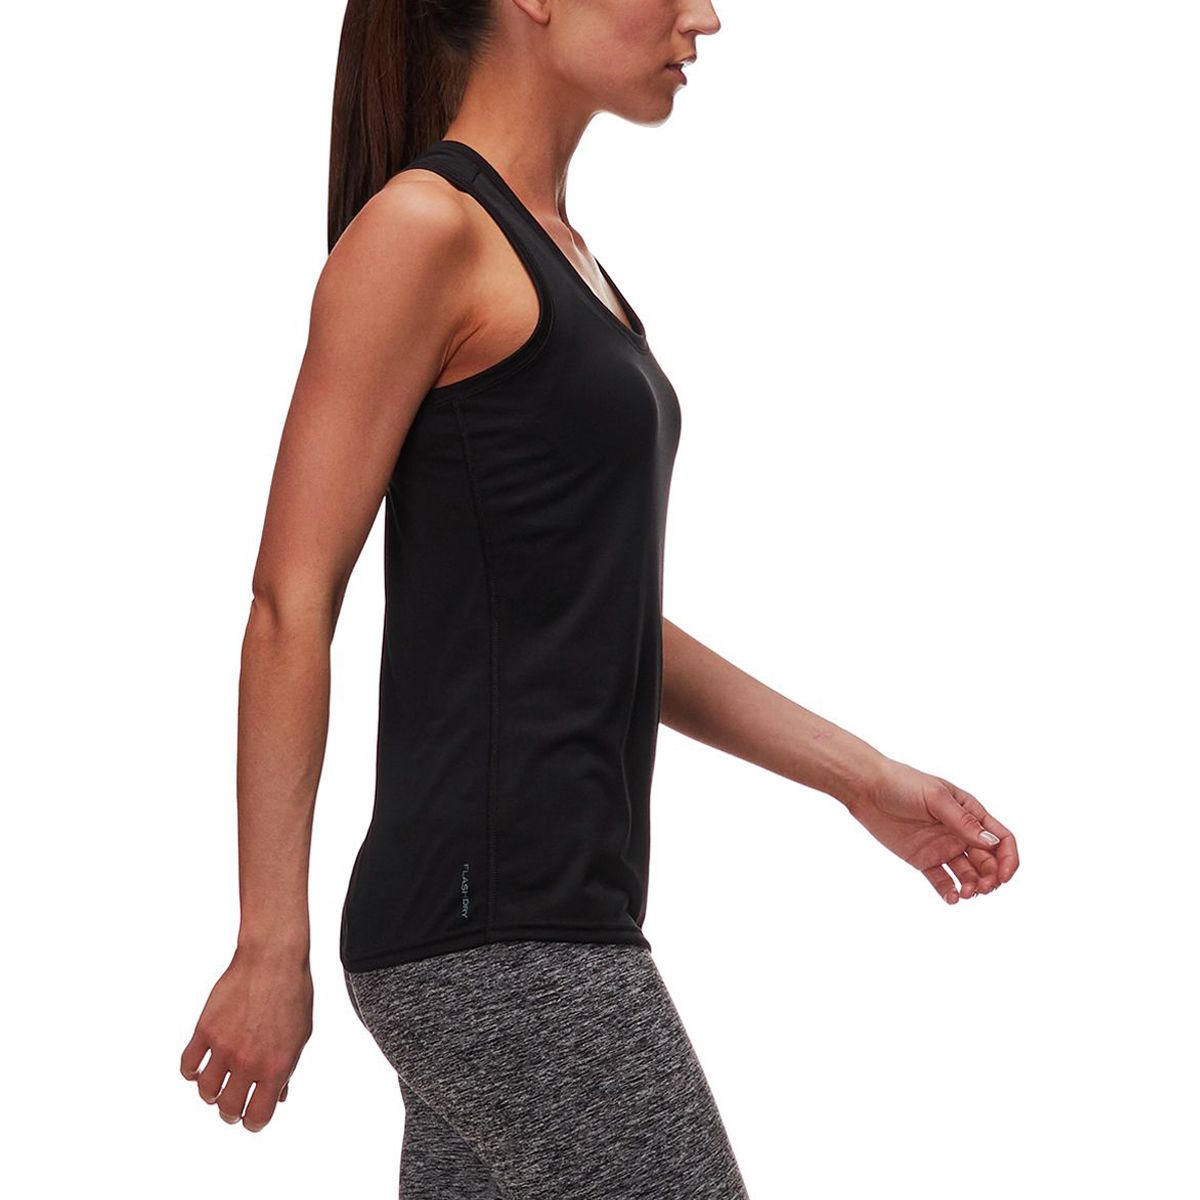 The North Face Reaxion Amp Tank Top - Women's - Clothing